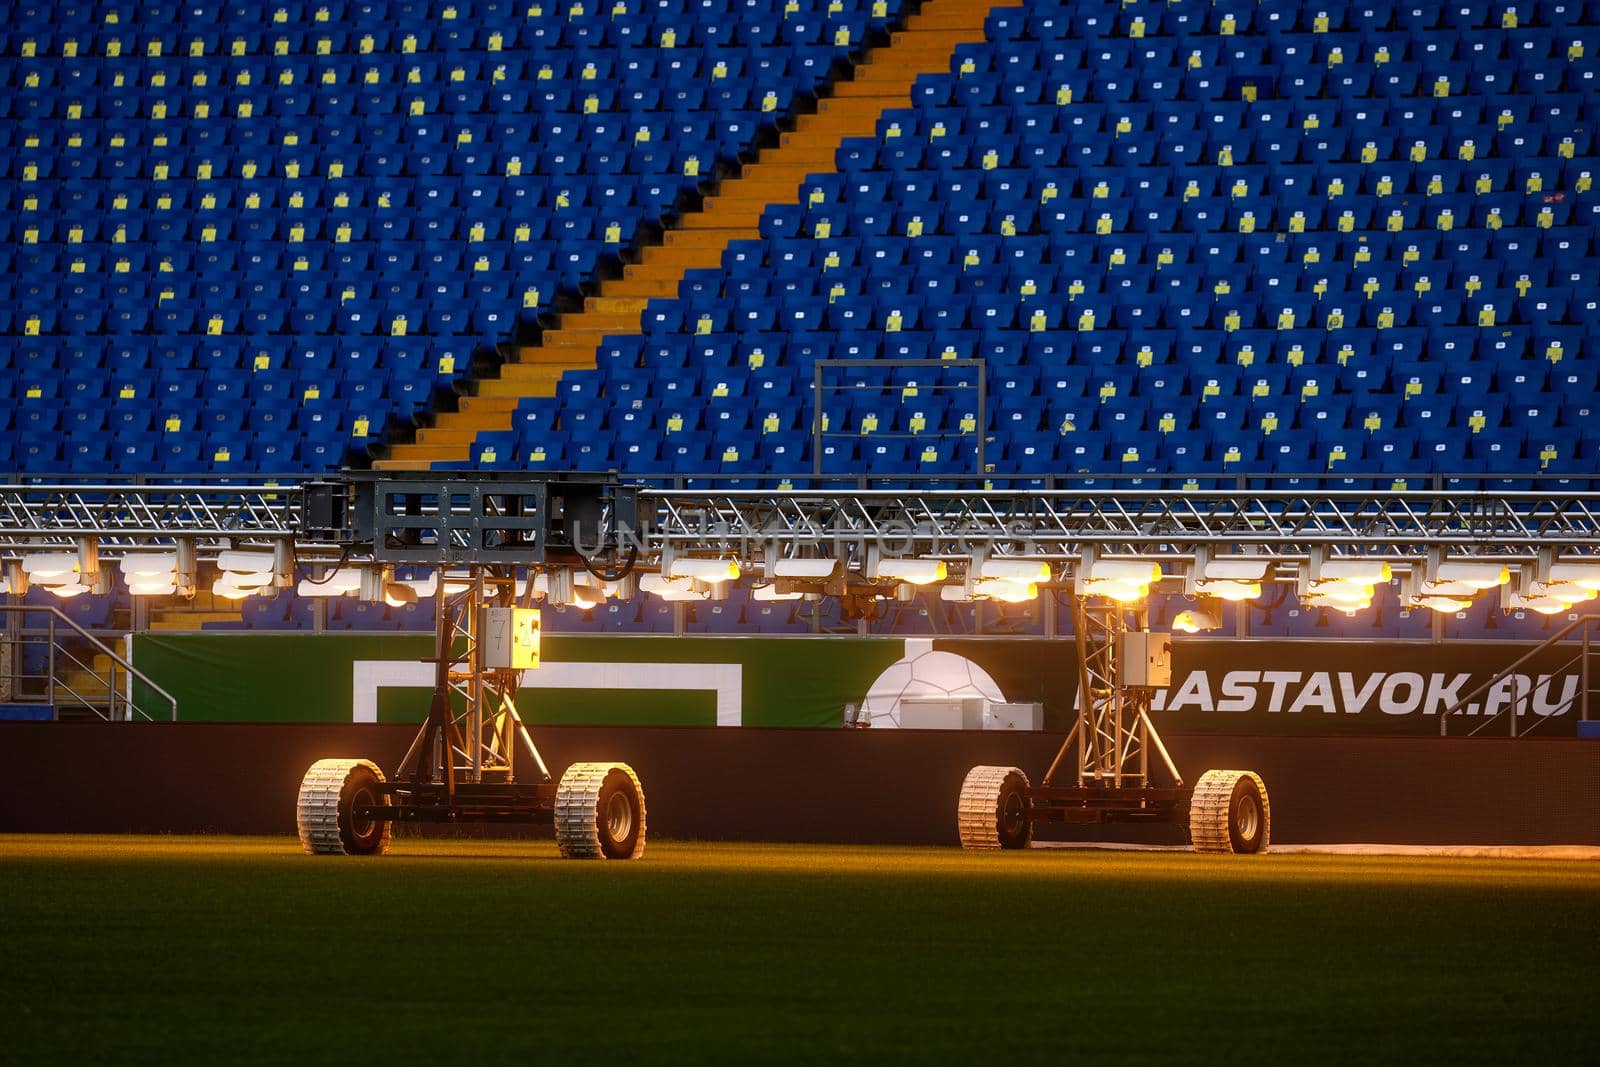 Artificial light system for growing football stadiums grass. Lamps to heat the lawn of the stadium and keep the grass in perfect condition. Lamps for football lawn by EvgeniyQW